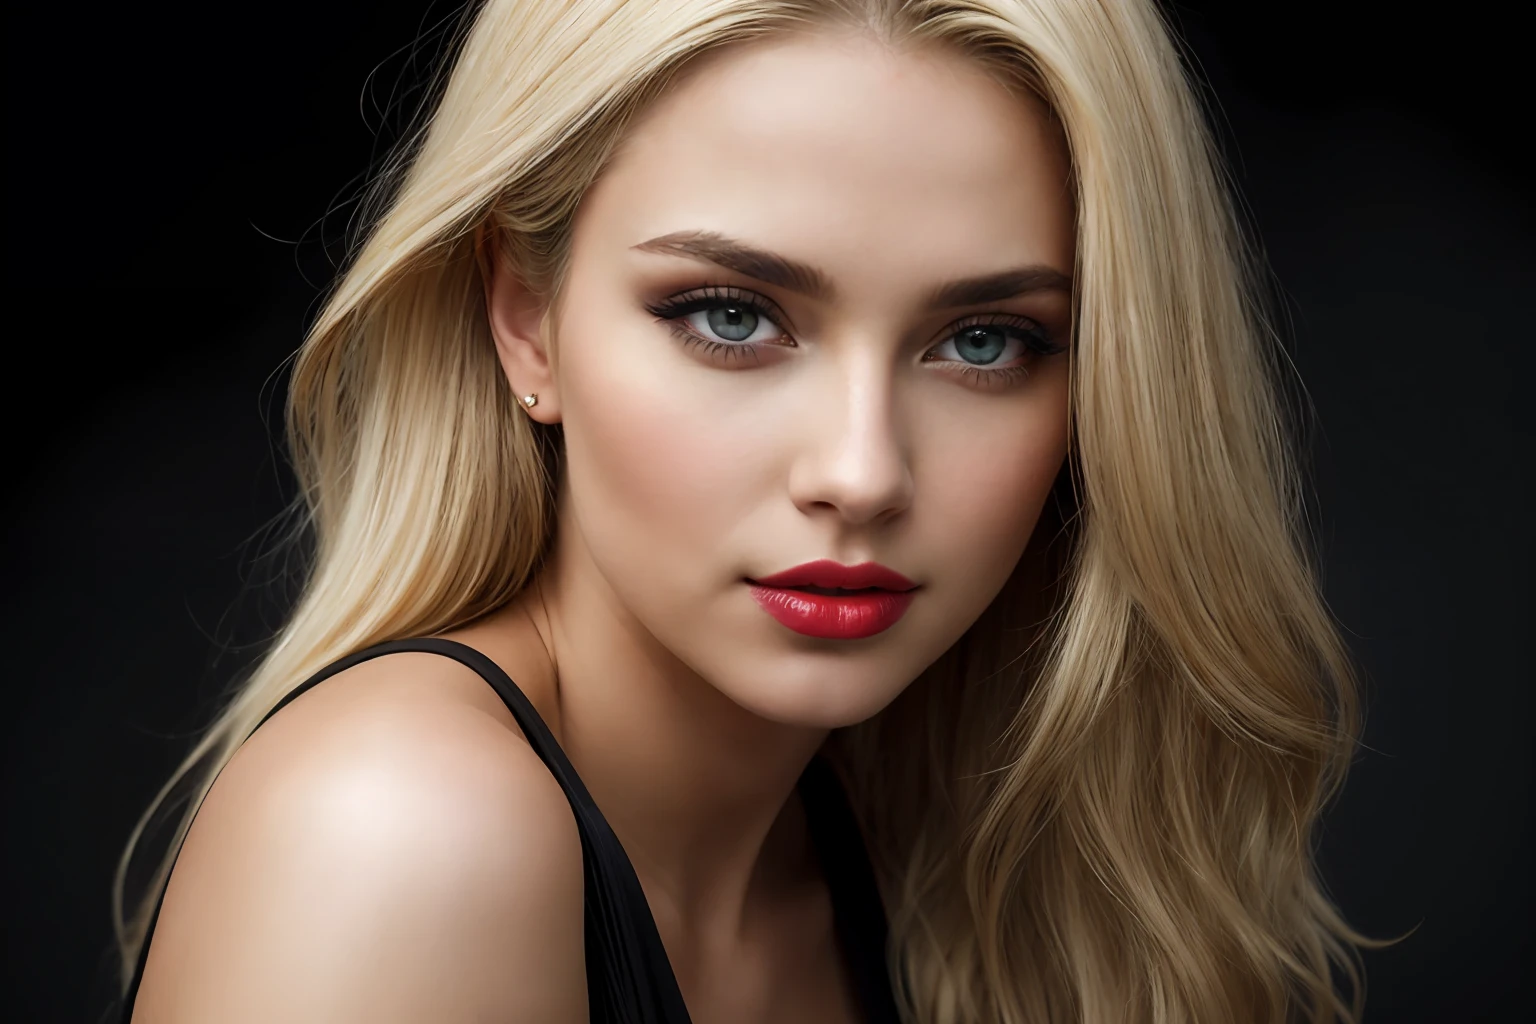 HelgaGrey,full body woman, (to8contrast style), (Close-up portrait), bold lips, 8k RAW photo, highest quality, detailed hazel-blue eyes, eye reflection, winged eyeliner, (looking at the viewer:1.3), best shadow, intricate details, interior, vibrant wavy Long hair layers with a side part, (blonde hair:1.3), muted colors, high contrast style, glam shot, smoldering, (sultry:1.1), dof, bokeh, intense, languid, tempting, sensual, seductive, longing, yearning, smitten, dark photography studio, minimal lighting, deep shadows, stark contrasts, dramatic highlights, (black backdrop:1.2), dimples, fullness, plumpness, natural pout, lusciousness, red lips, bold color, alluring, captivating, striking, unforgettable, stunning, breath-taking, timeless beauty. (bare shoulders:1.2), headshot